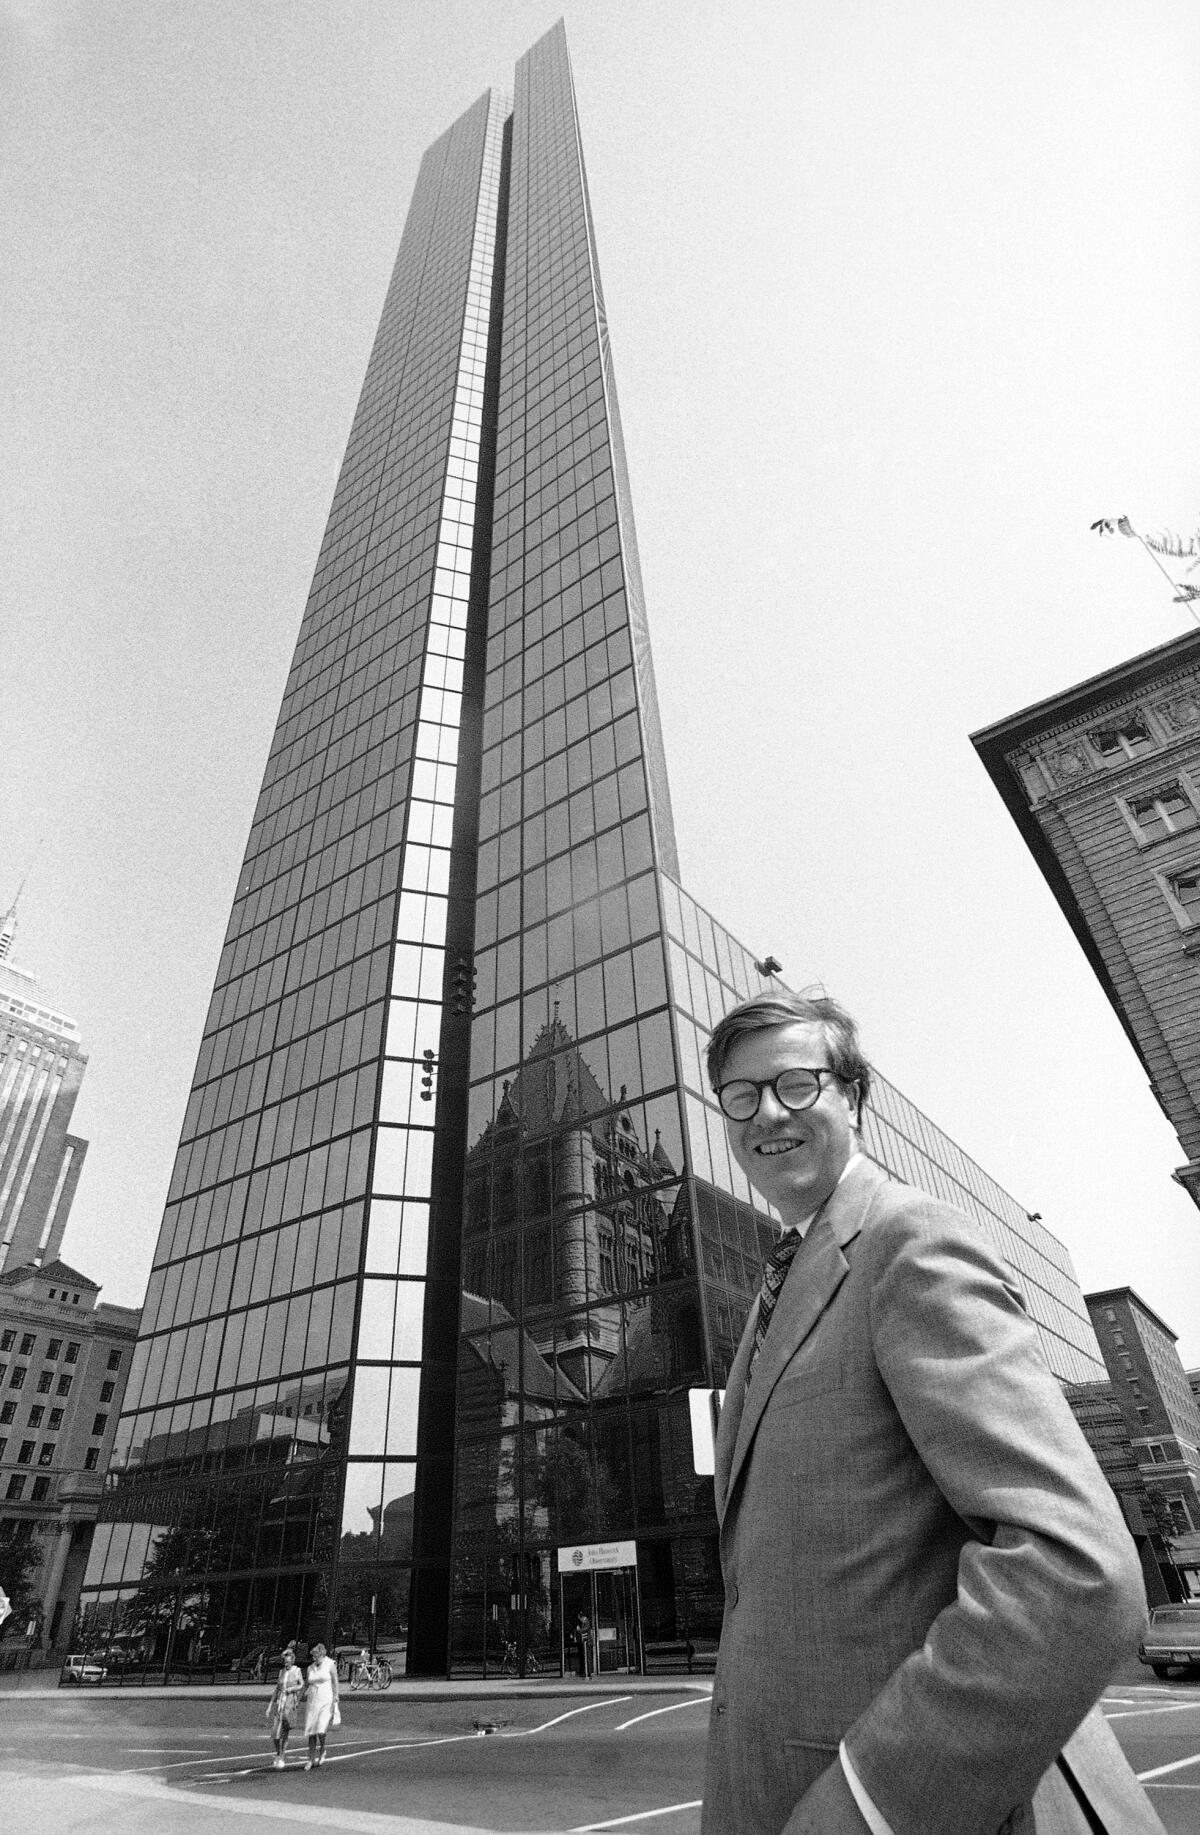 Architect Henry Cobb stands across the street from the John Hancock Tower in Boston in 1977.